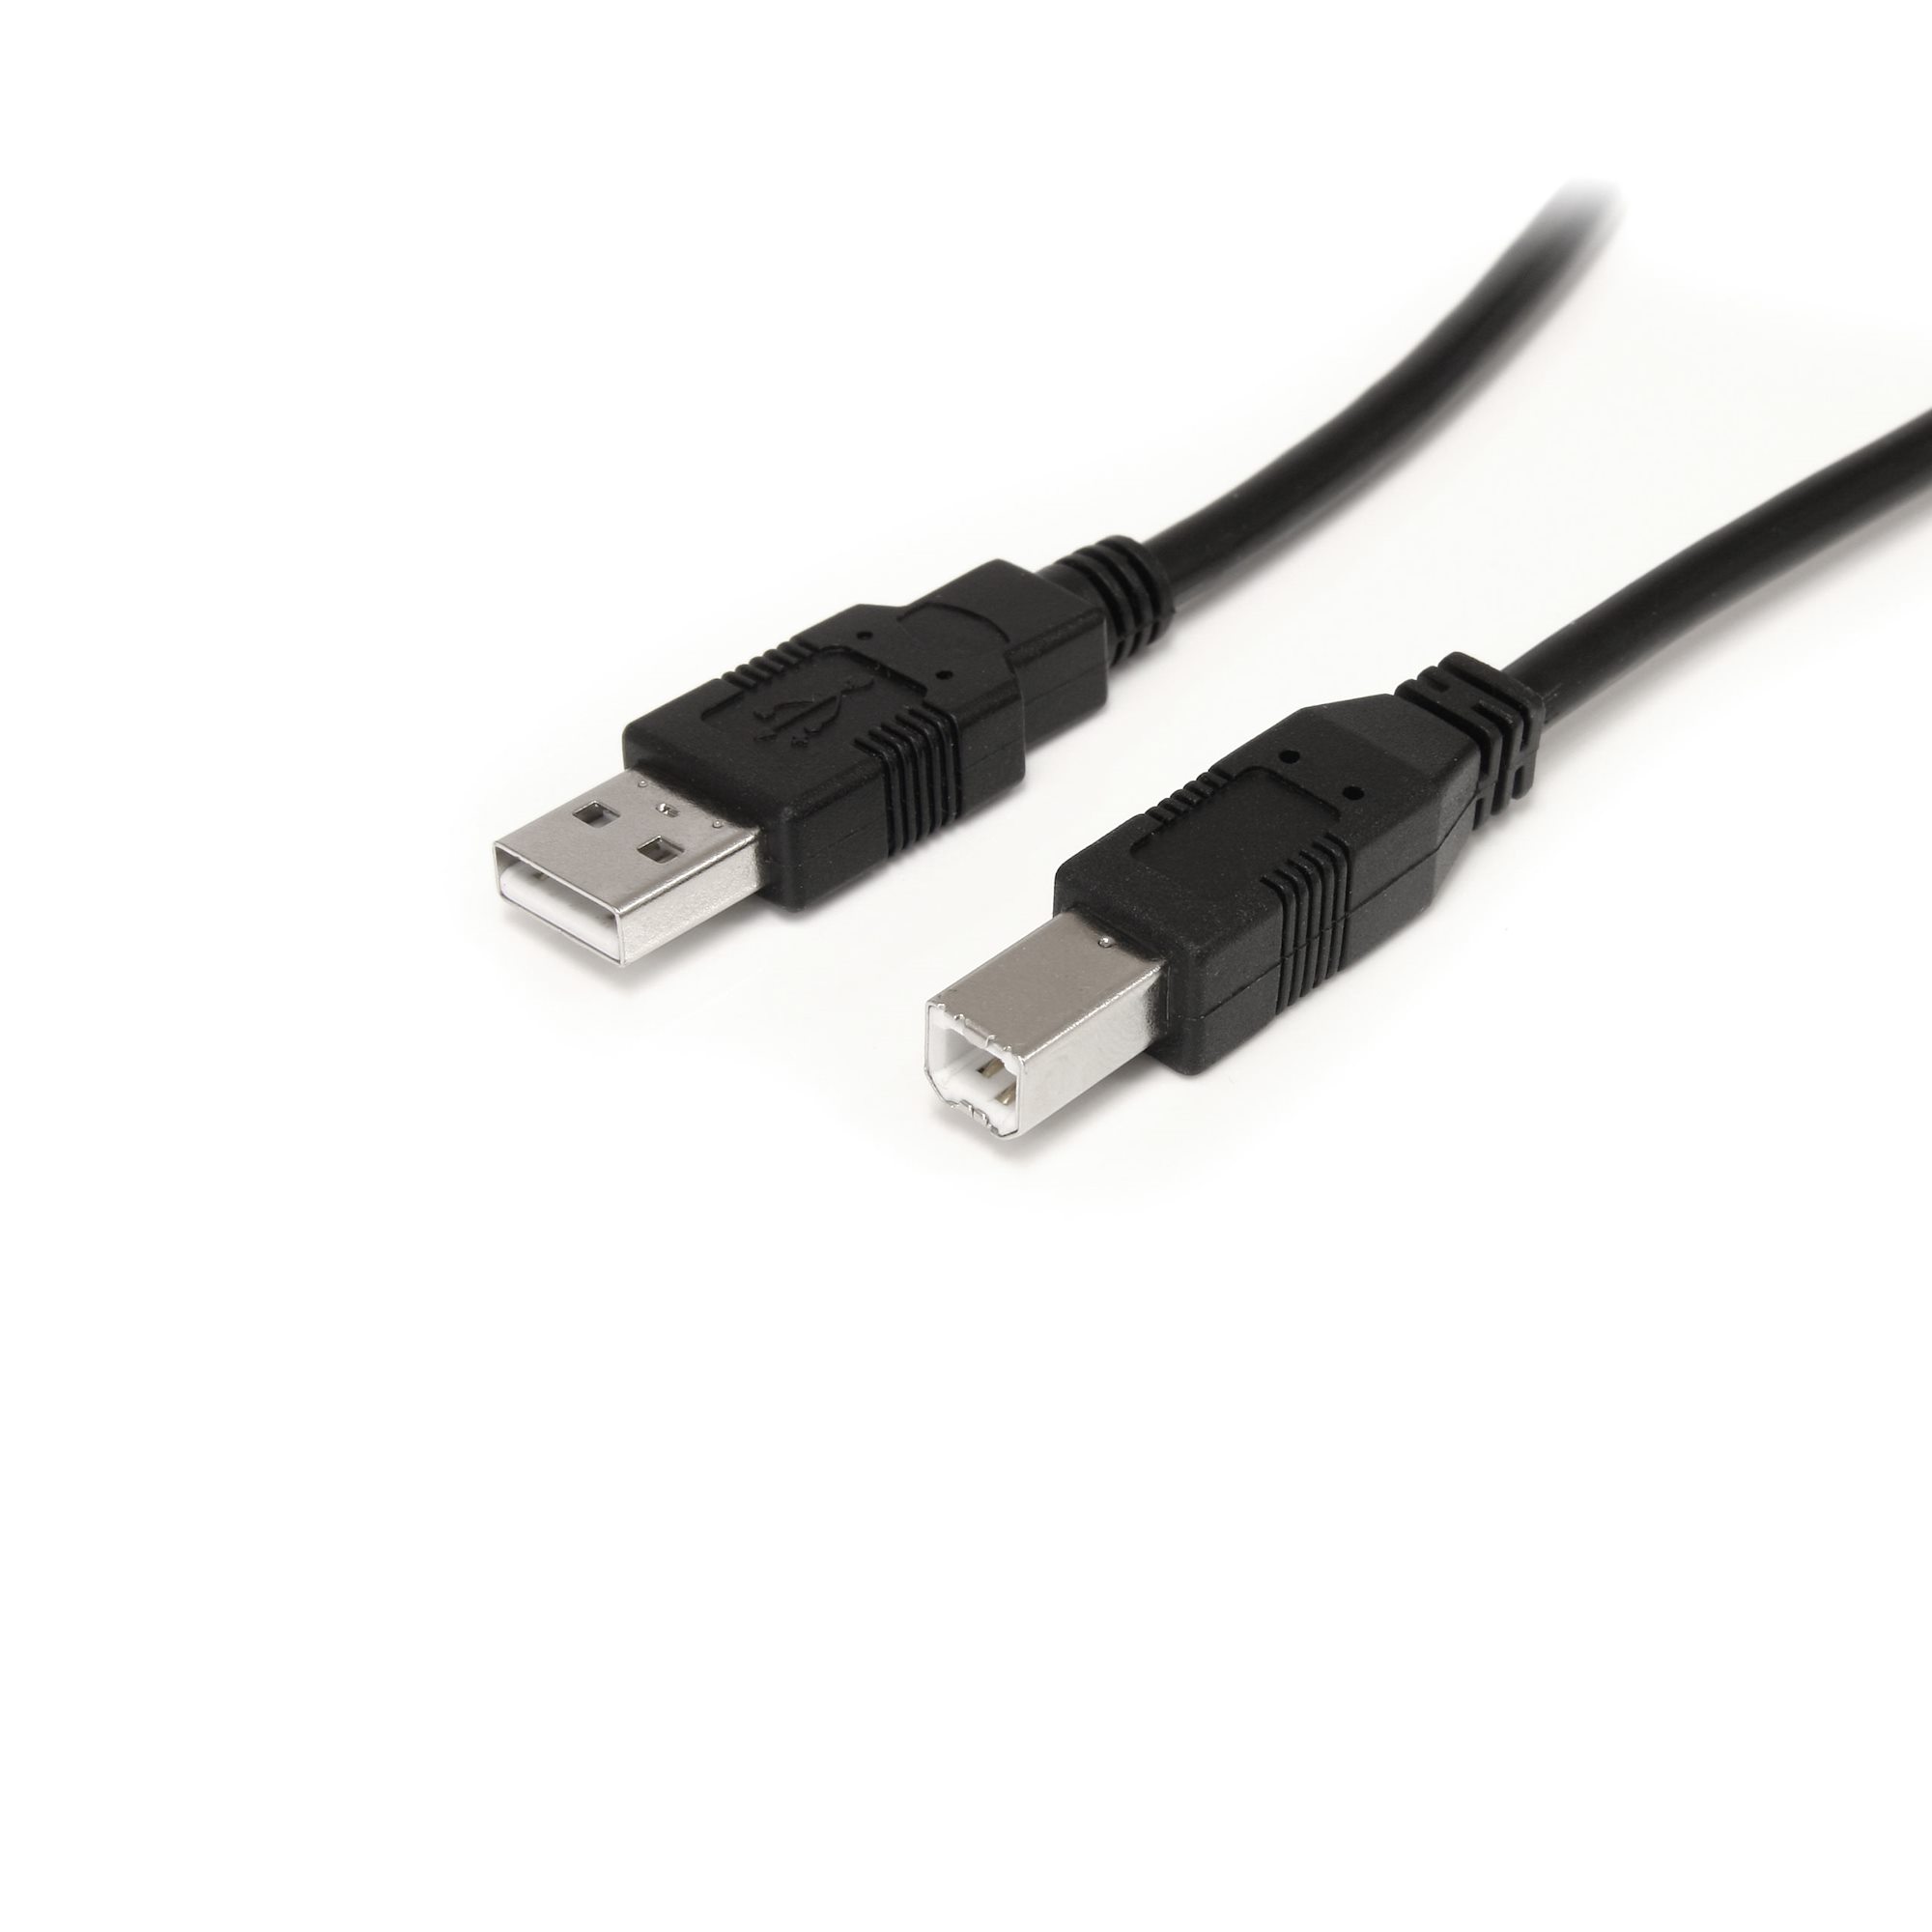 3M 10FT USB 2.0 High-Speed A/A Male To Male Extension Cable Line Wire Cord 